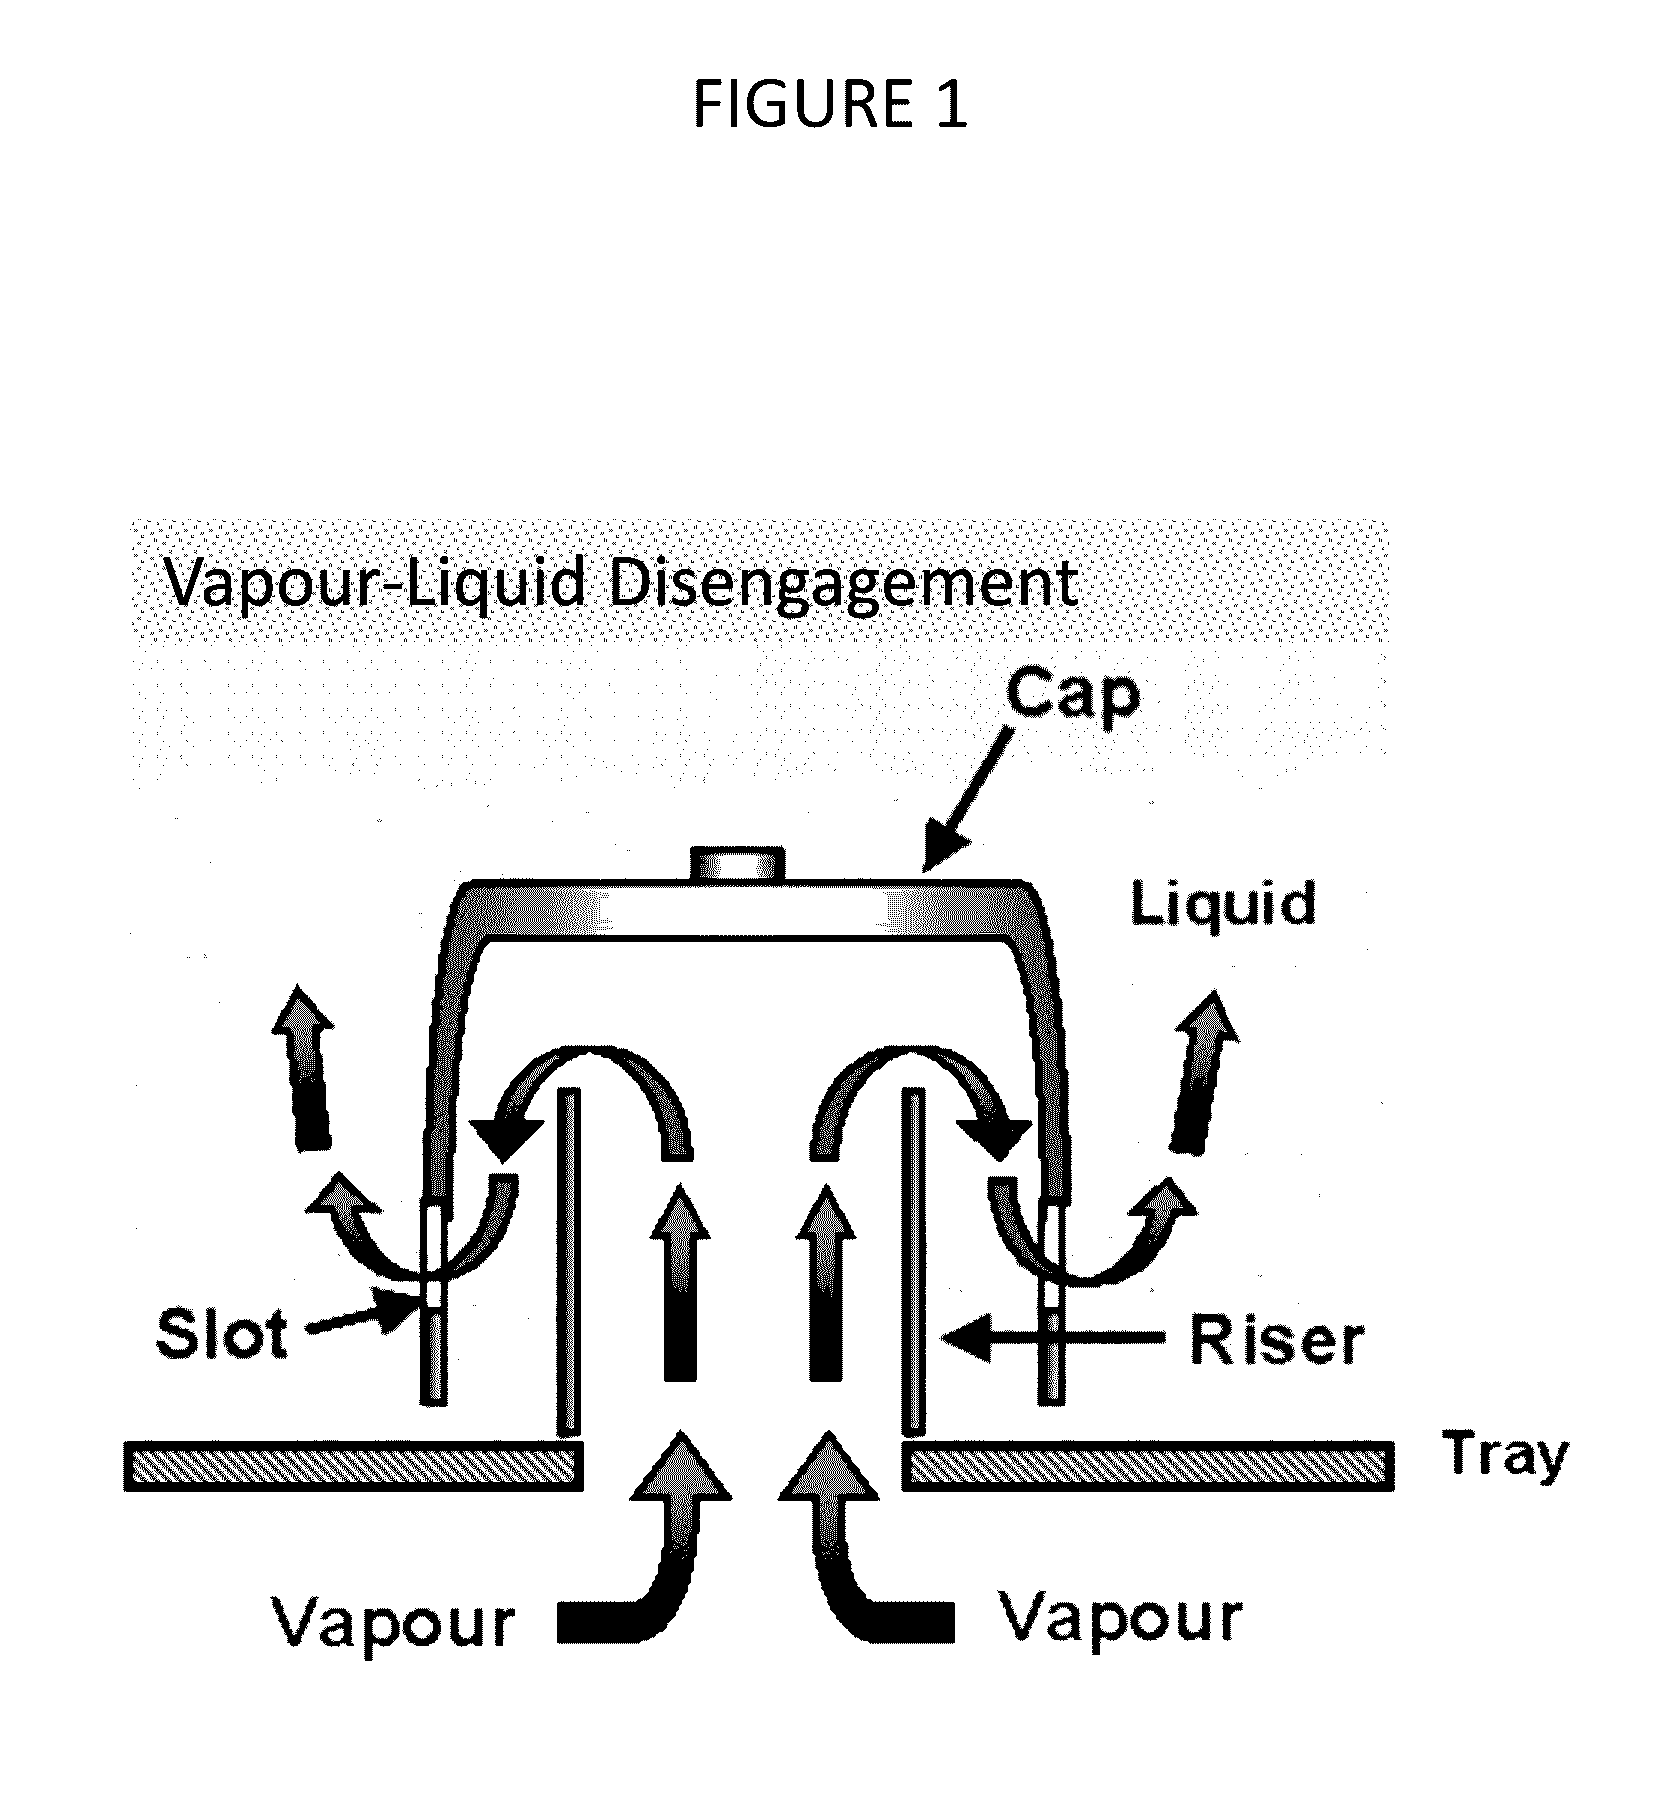 Semi-continuous treatment of produced water with boiler flue gas